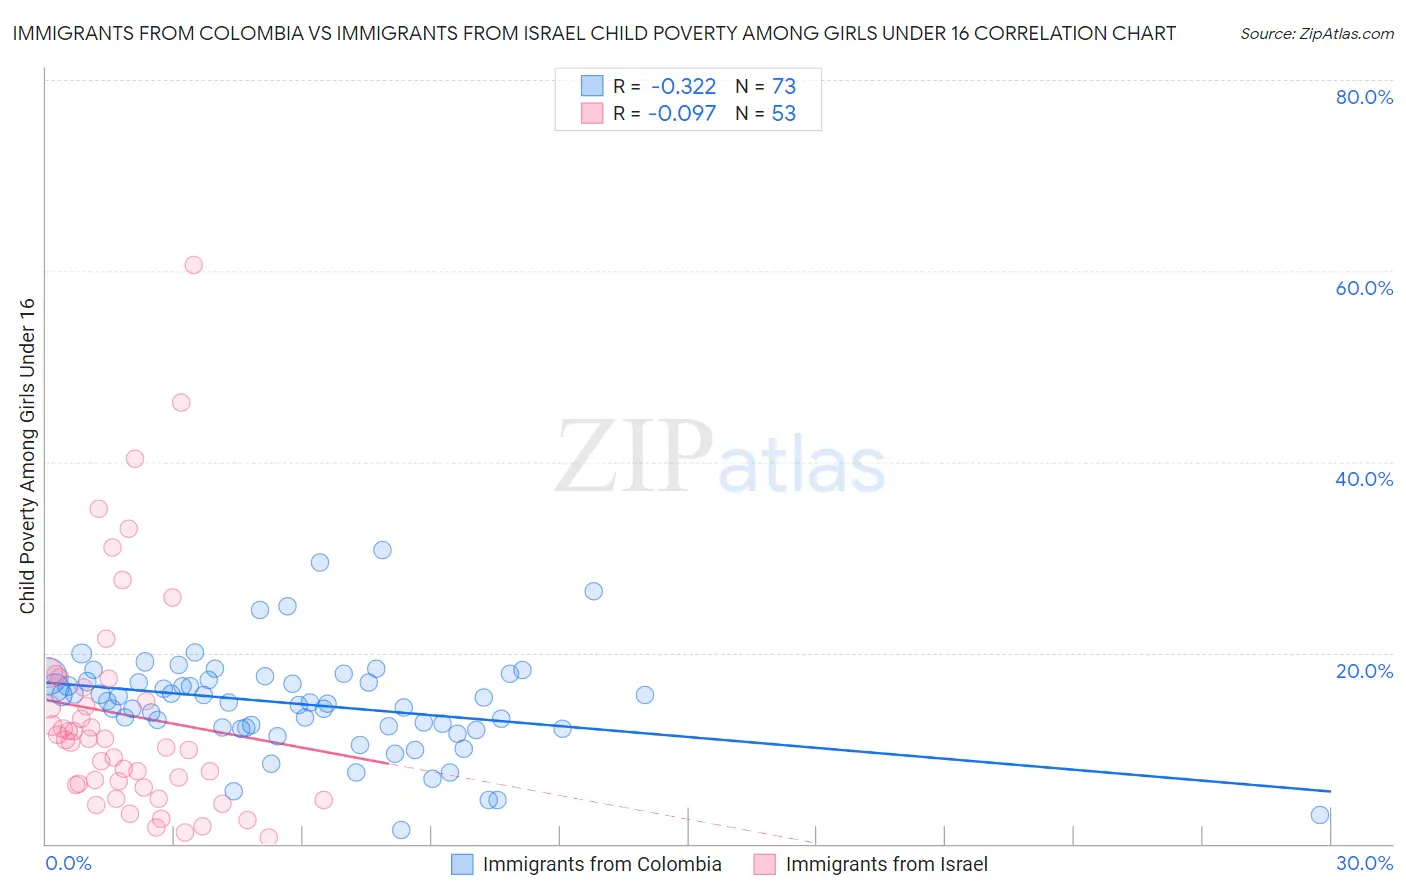 Immigrants from Colombia vs Immigrants from Israel Child Poverty Among Girls Under 16